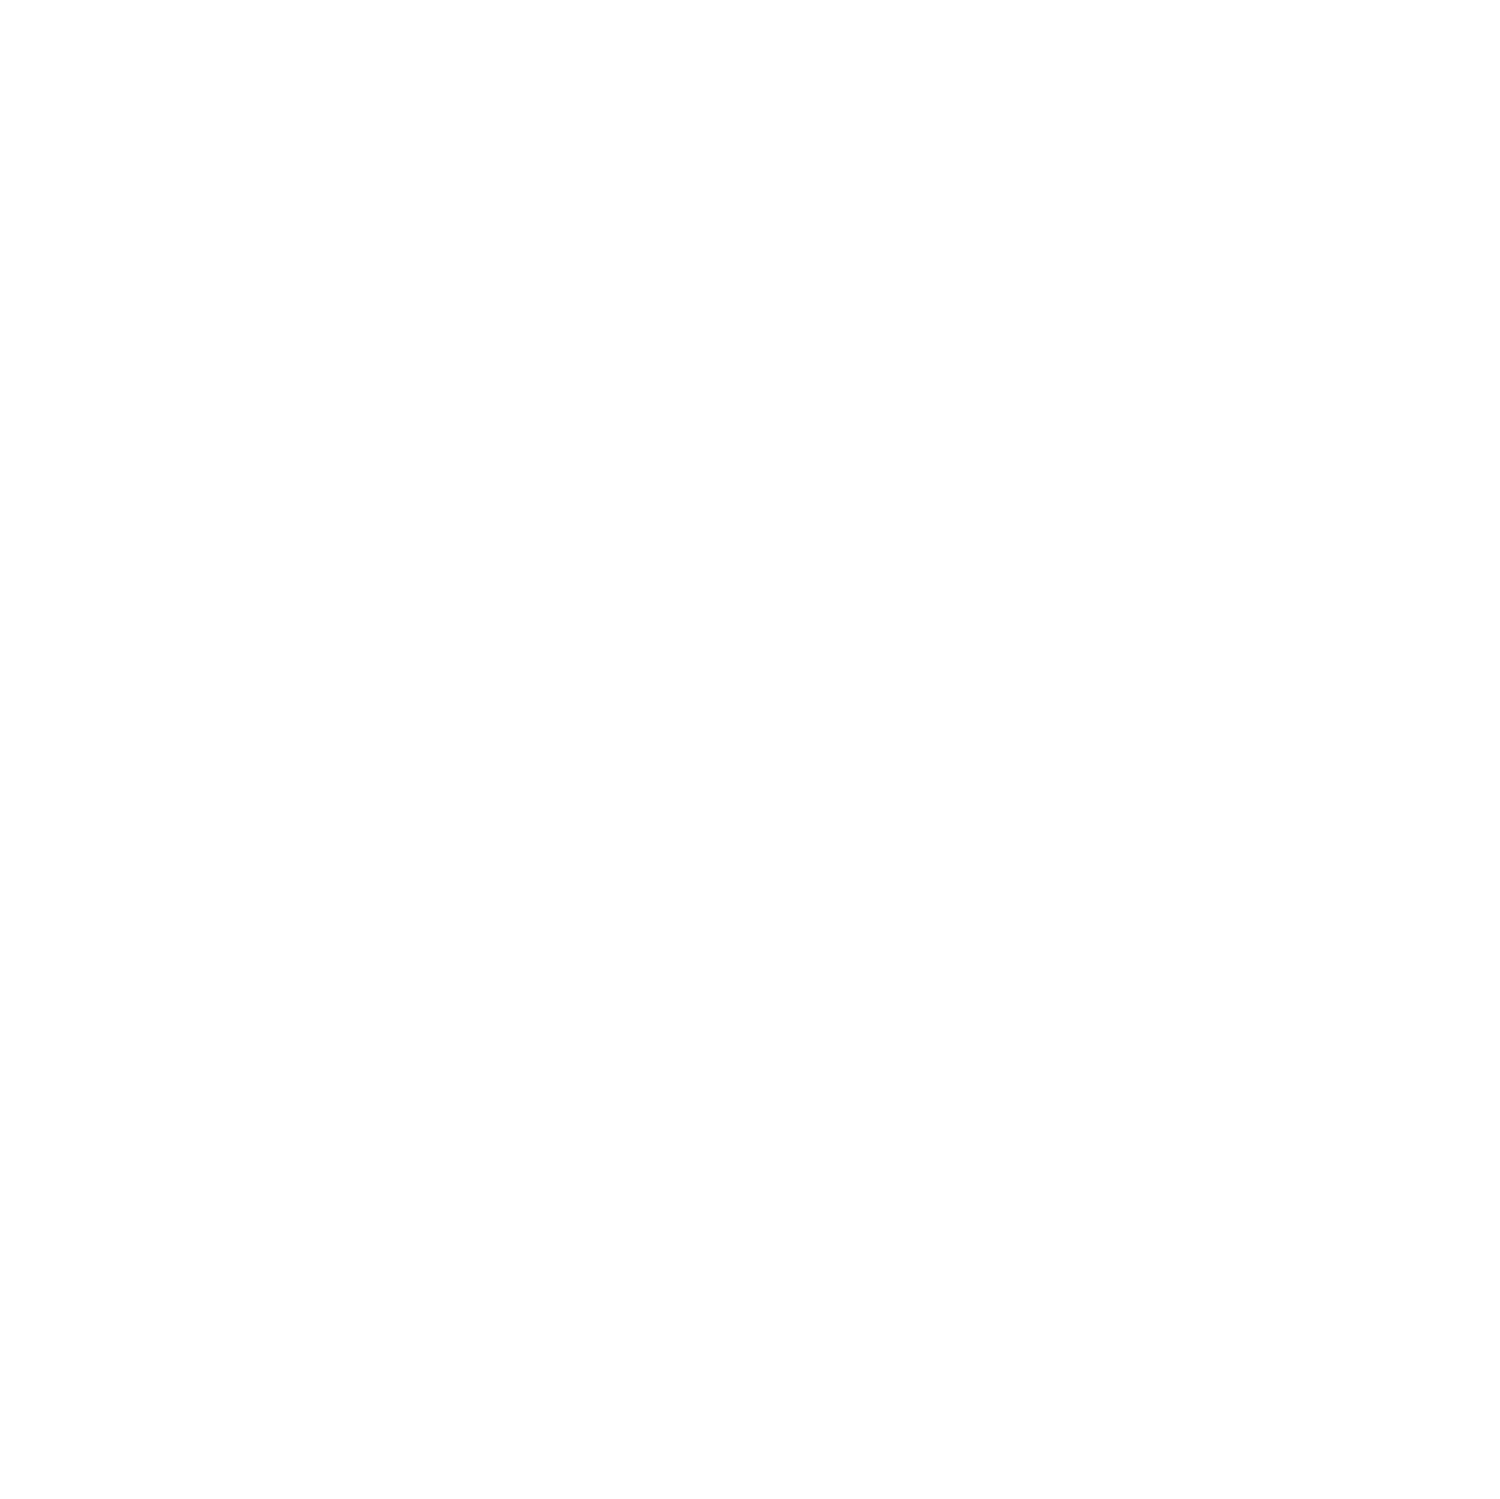 Blue Rose Beauty & Brow Artistry | Eyebrow Threading, Tinting, Waxing, Microblading, and Permanent Makeup in Little Rock